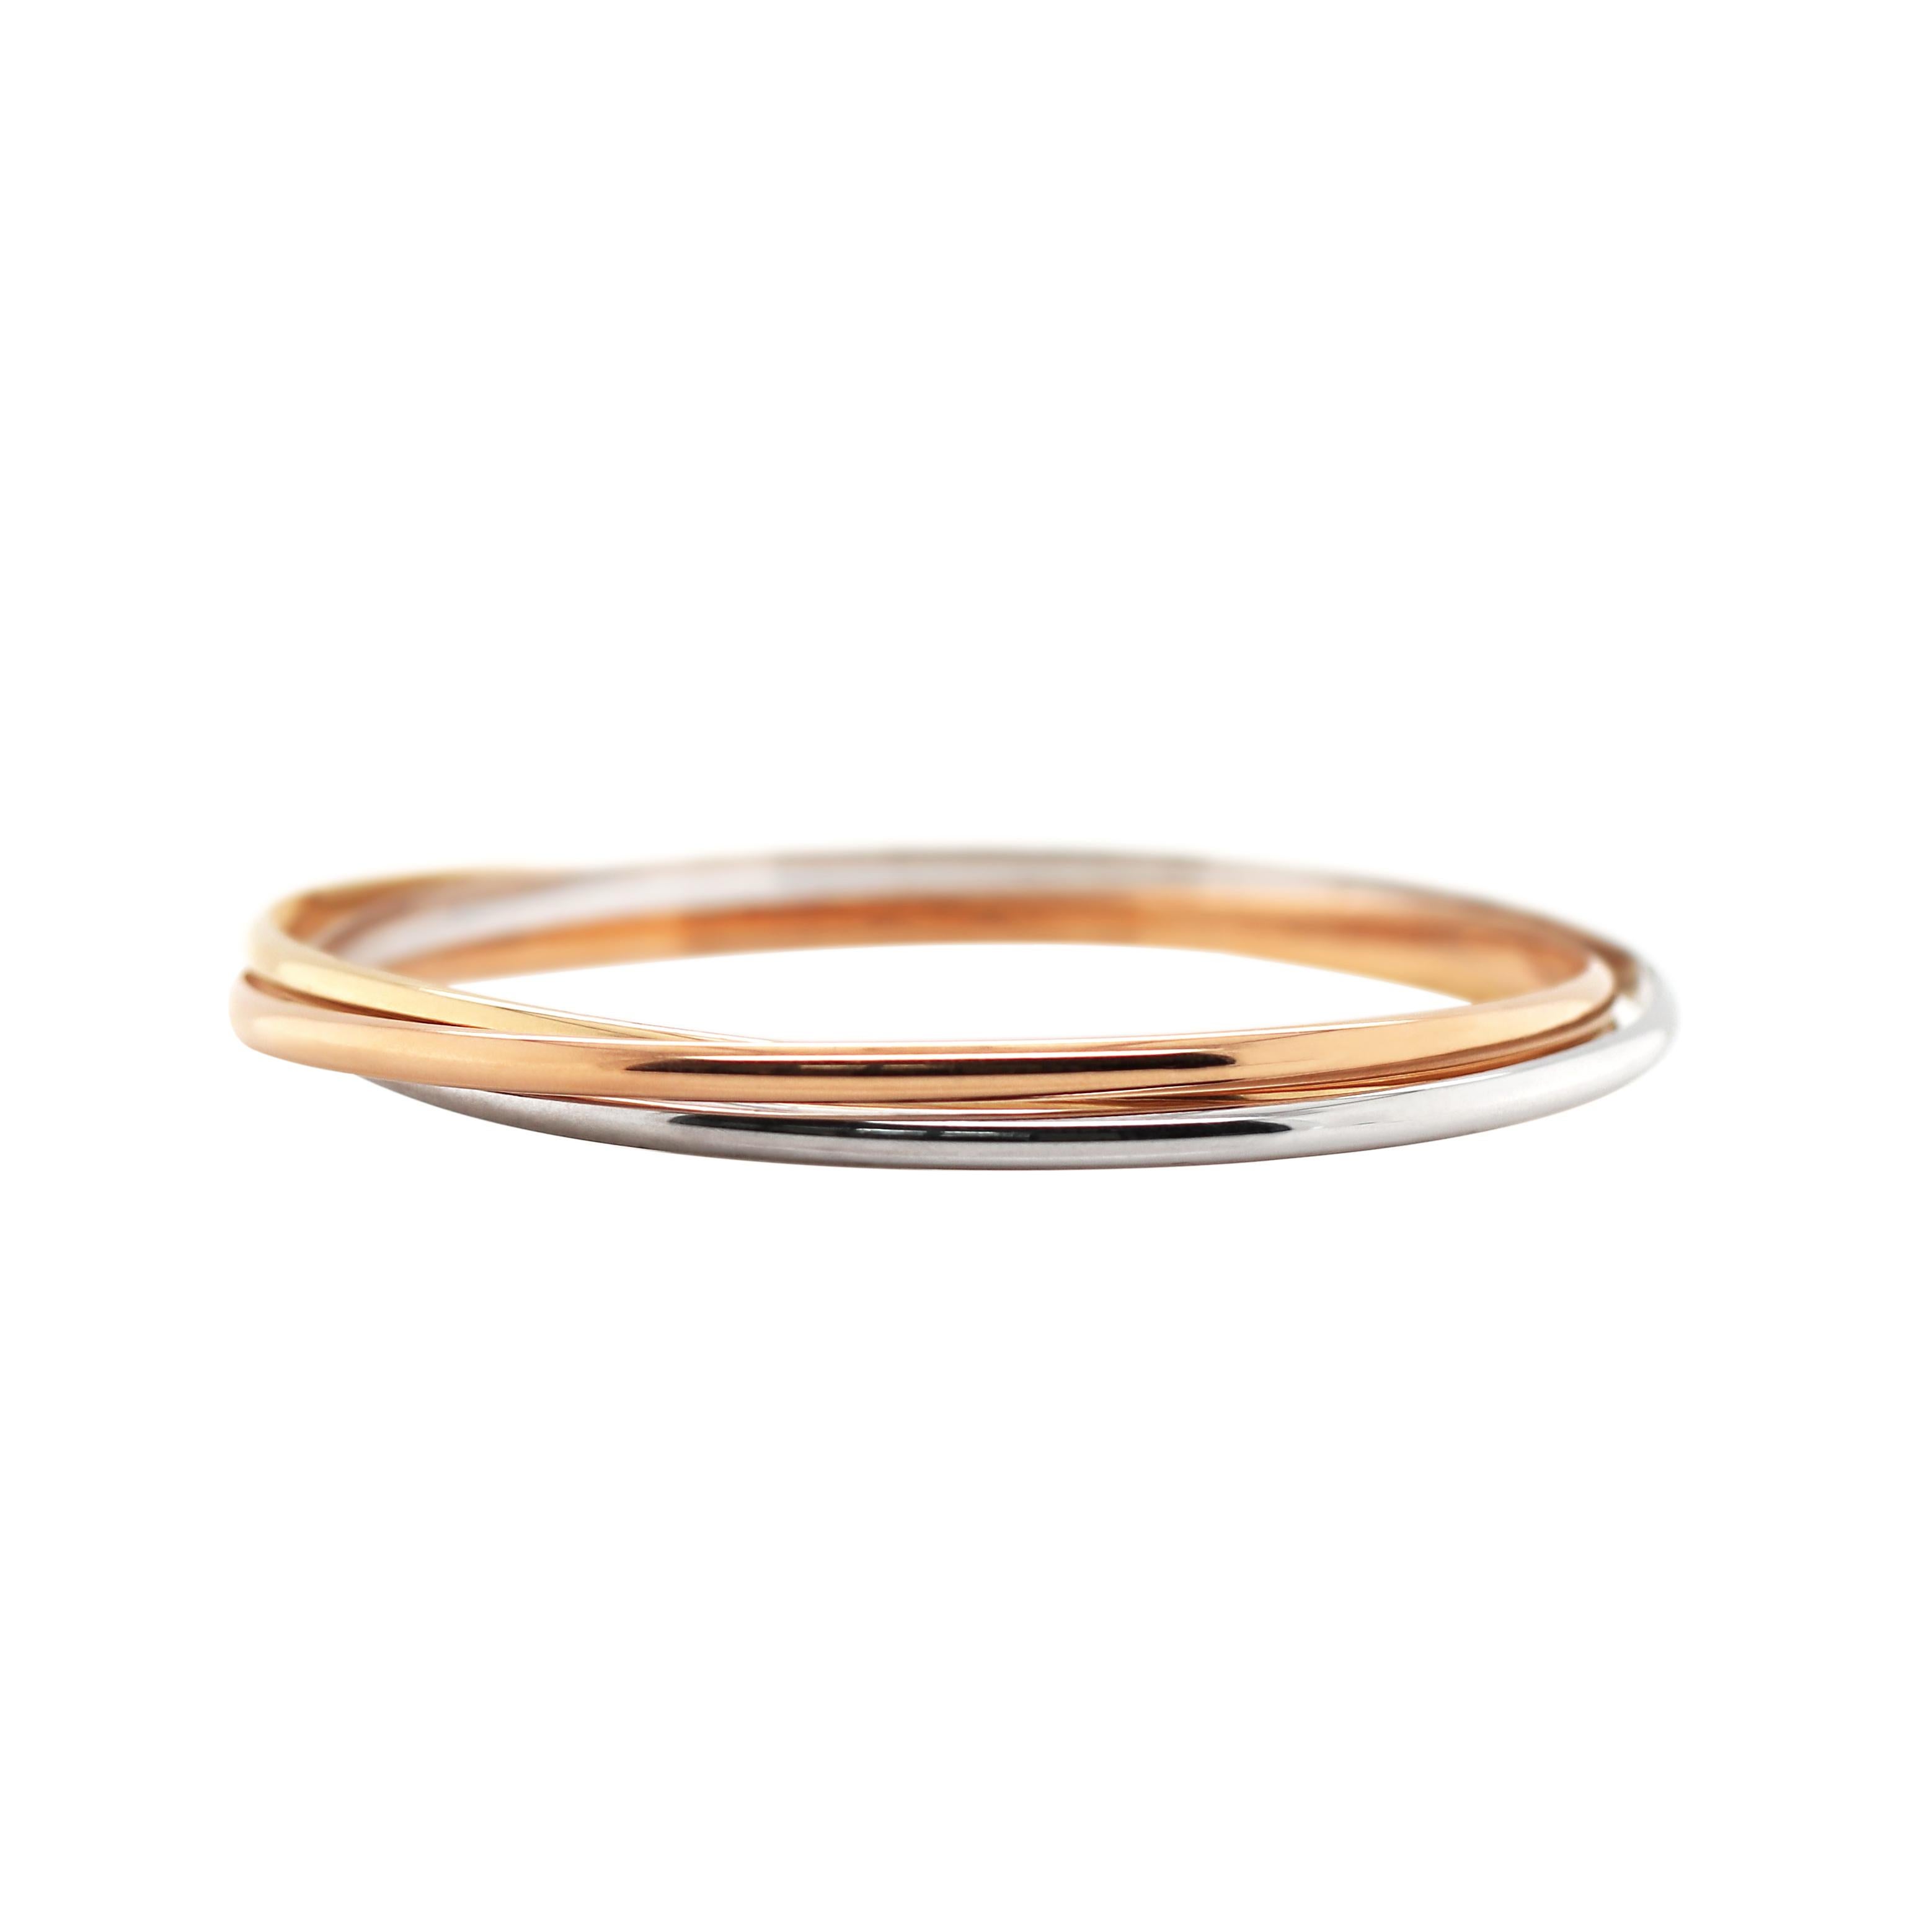 This trinity bangle is composed of three plain 18 carat gold bangles, one white, one yellow and one rose connected to make a classic Russian bangle. Each bangle measures 3mm in width and 7cm in diameter and weighs a total of 35.87g. Stamped 18K.